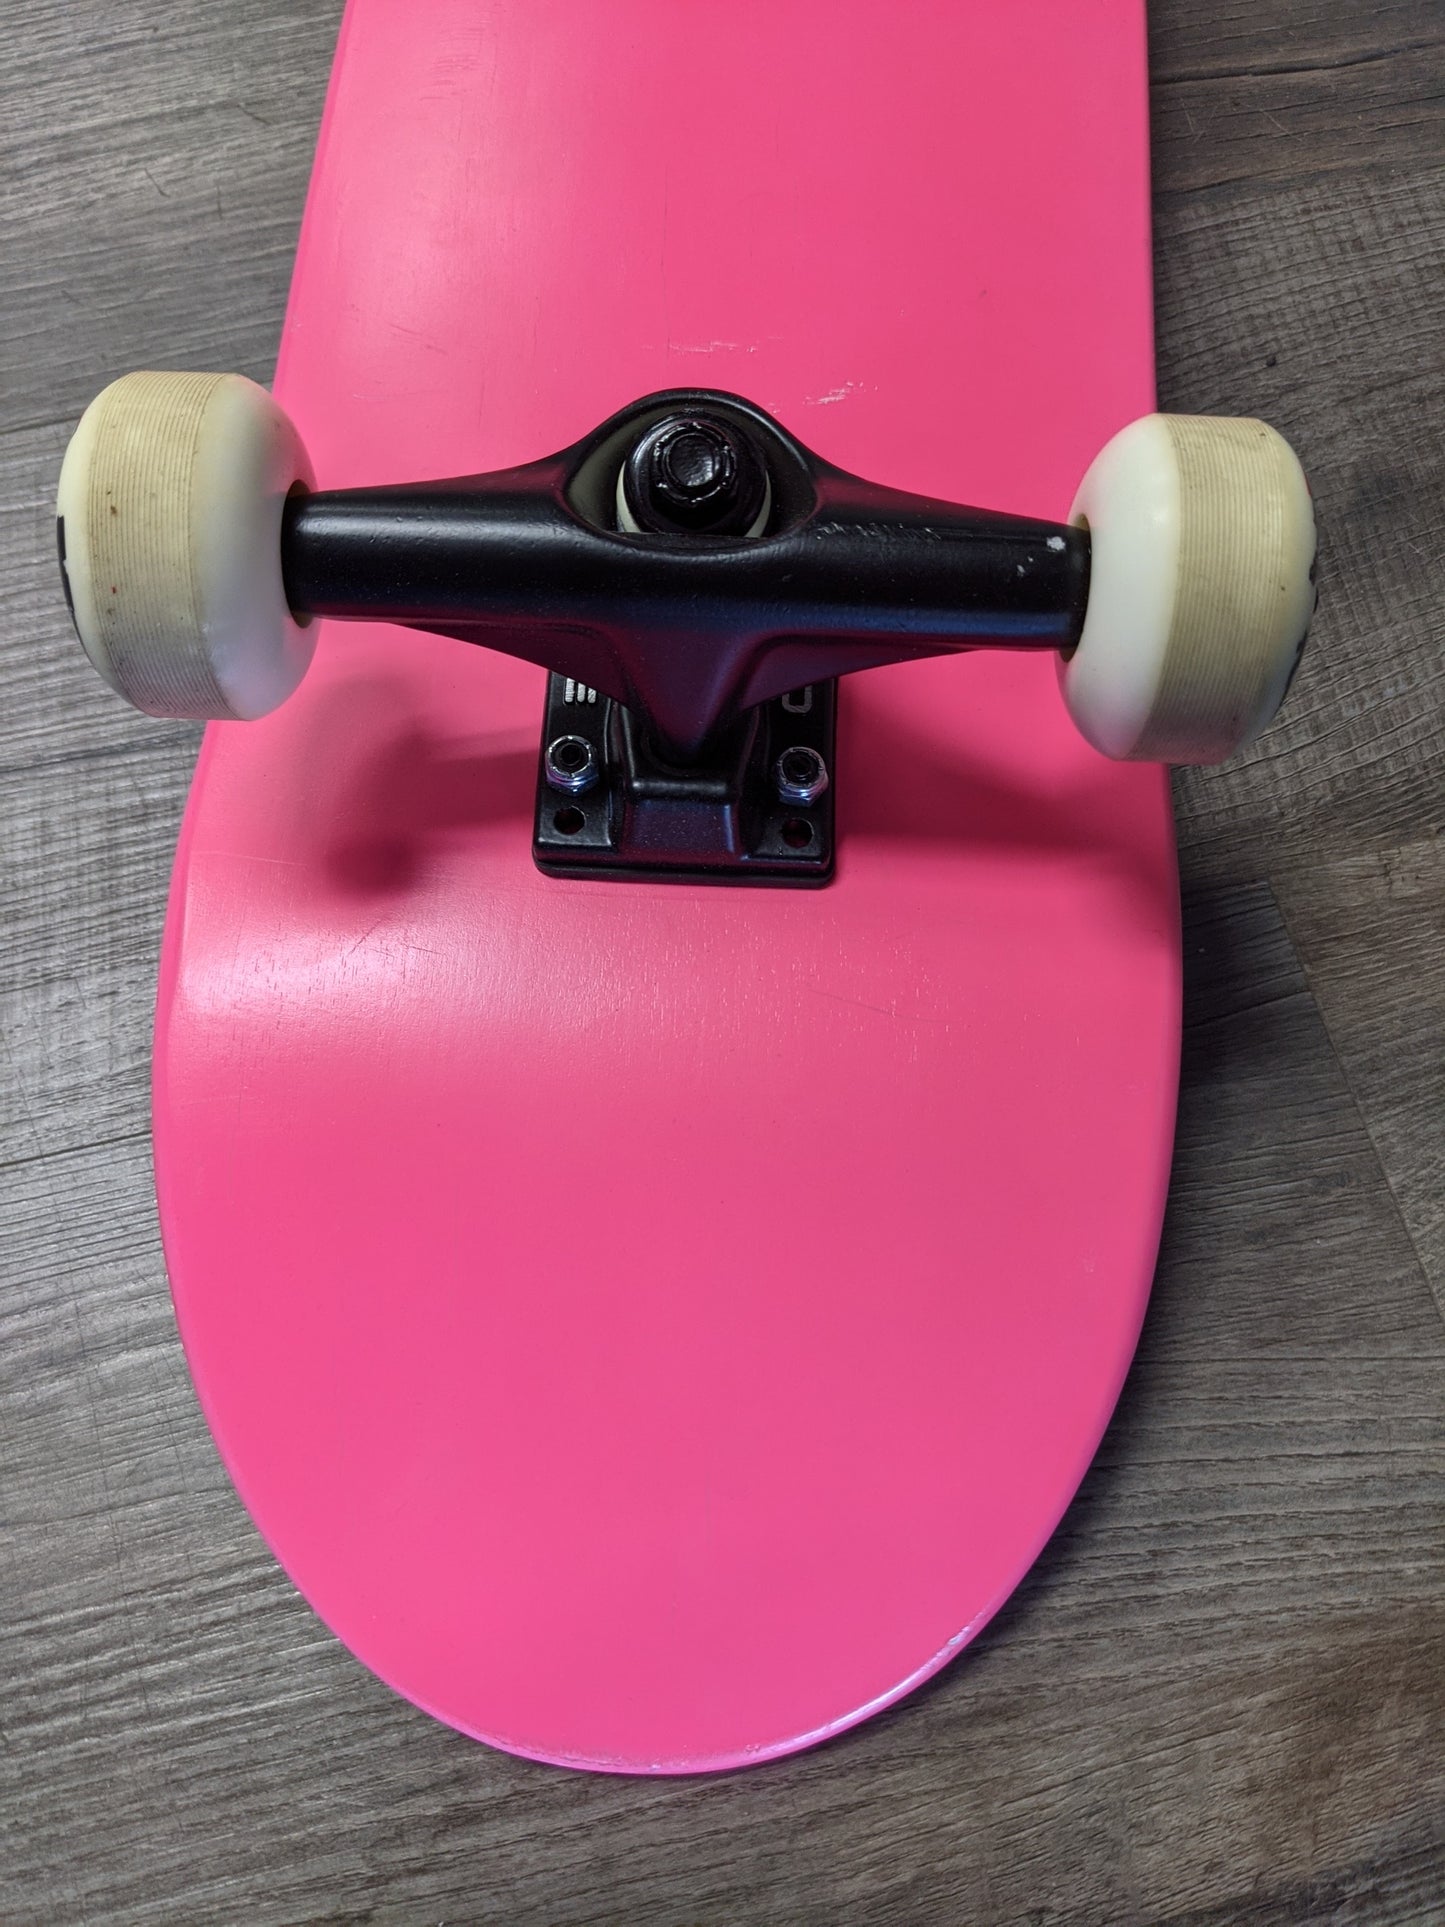 Moose Complete New Skateboard, Pink, Size: 7.5x32 In